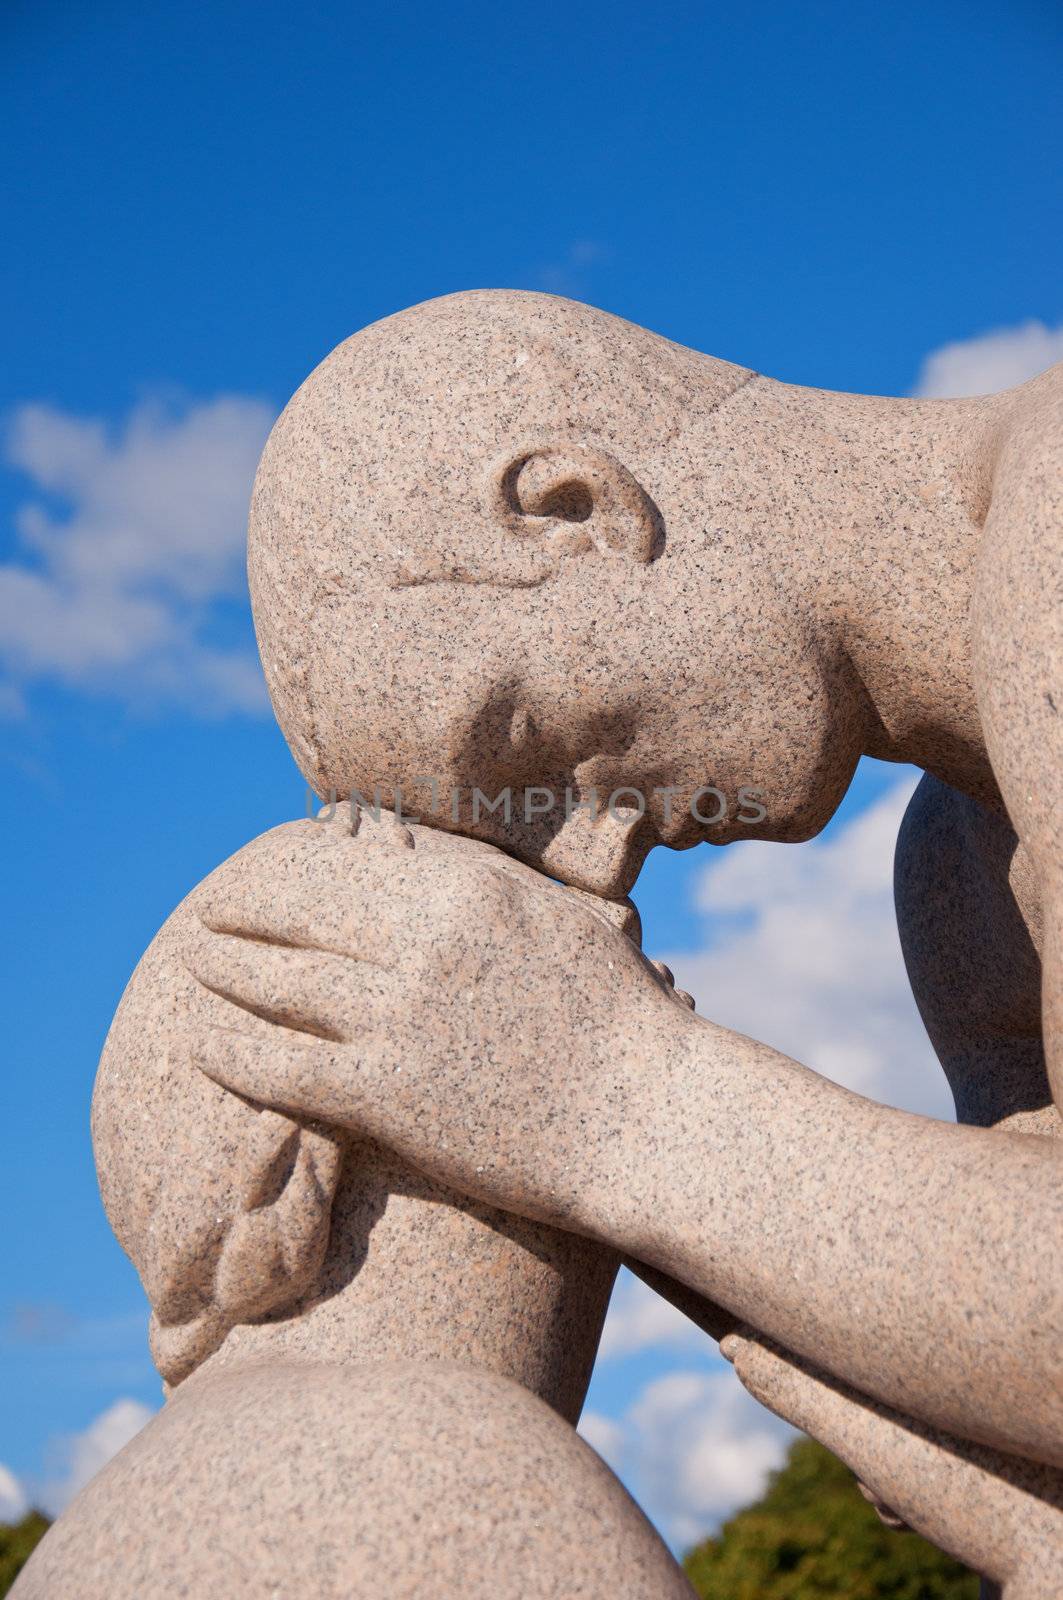 OSLO, NORWAY - September 9: Man and woman statue created by Gustav Vigeland in the popular Vigeland park in Oslo, Norway on September 9, 2011.